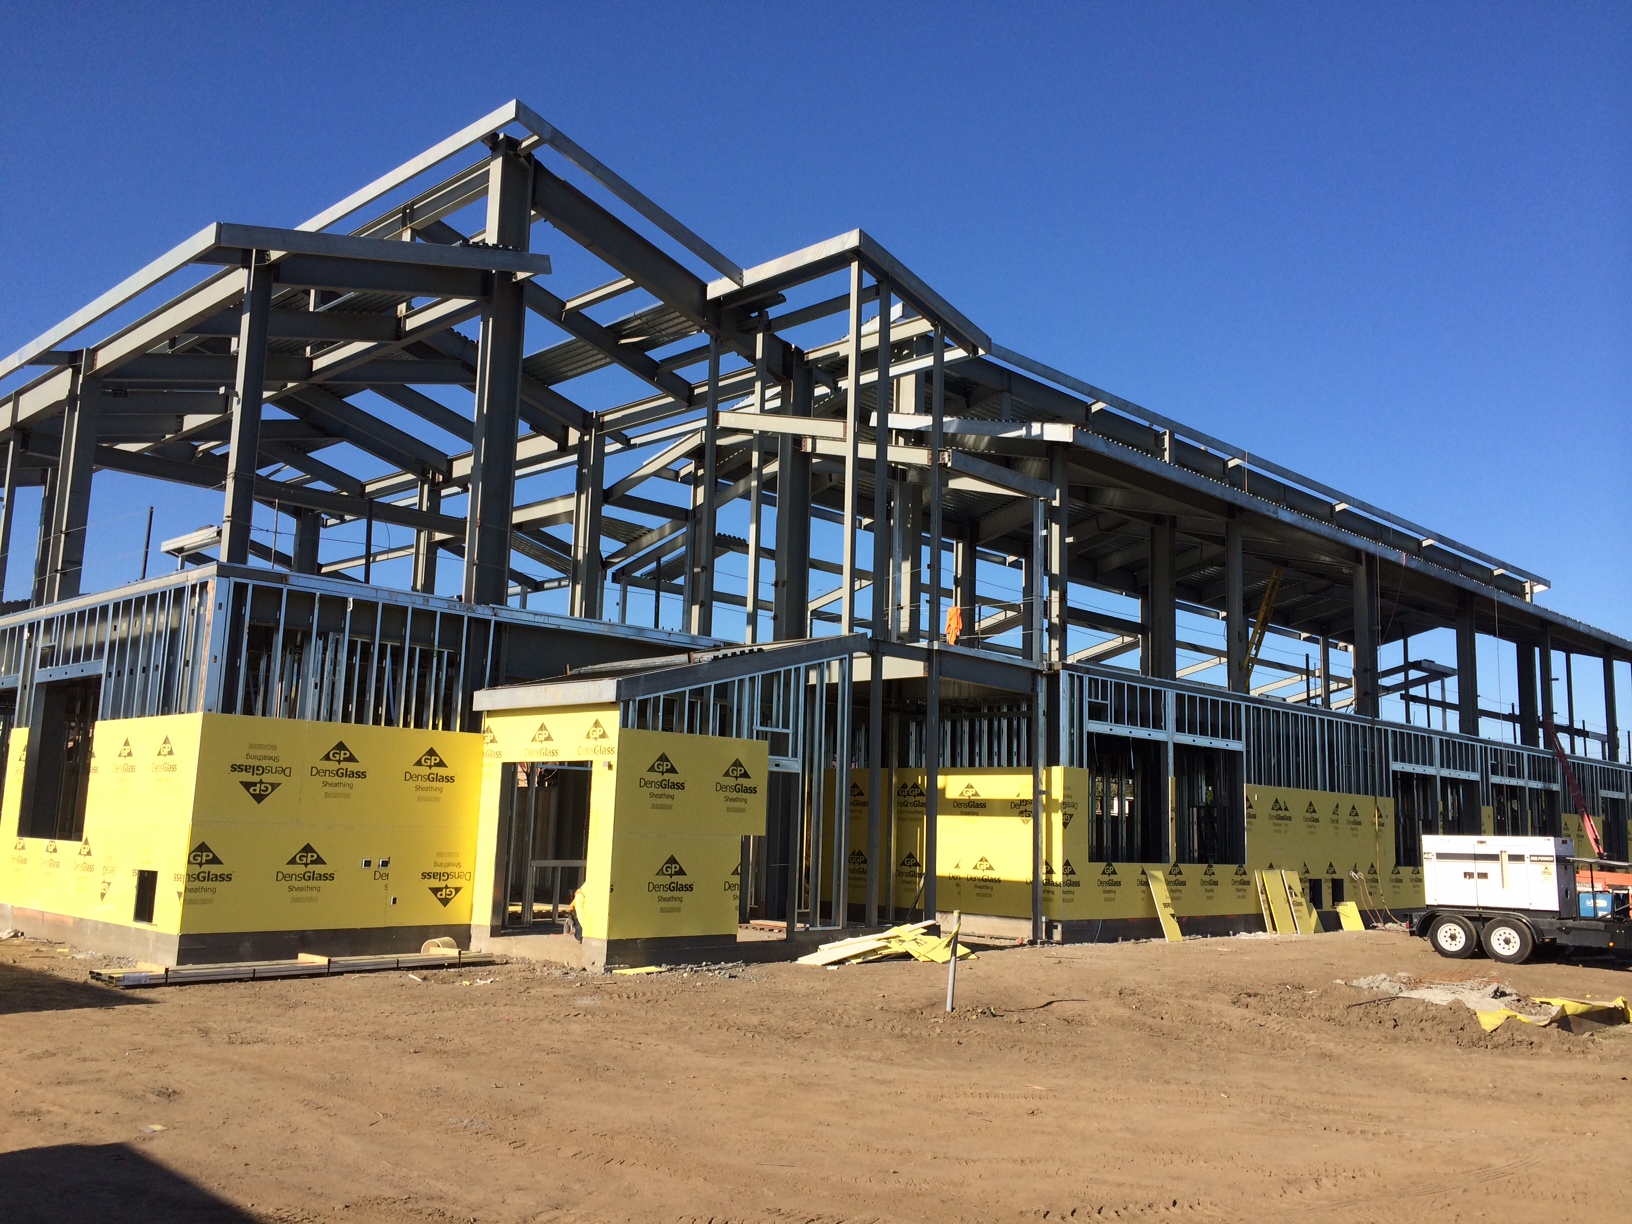 Easterbrook Discovery Modular School Under Construction